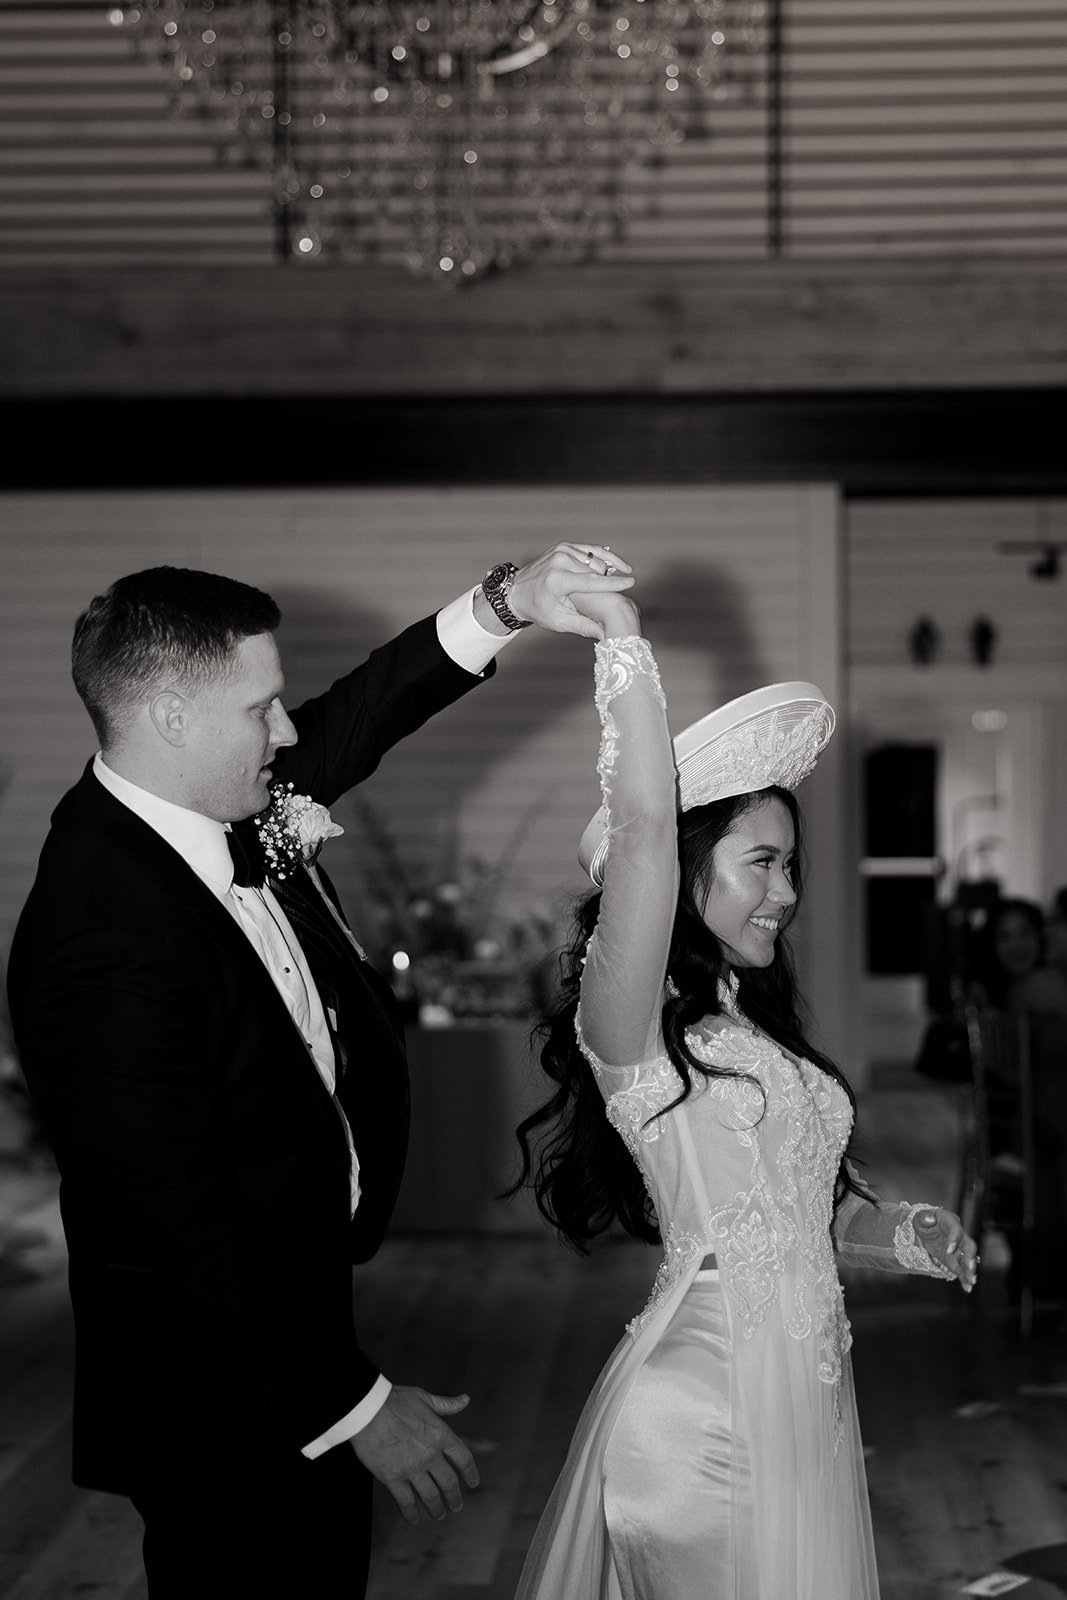 the couple spinning during their first dance